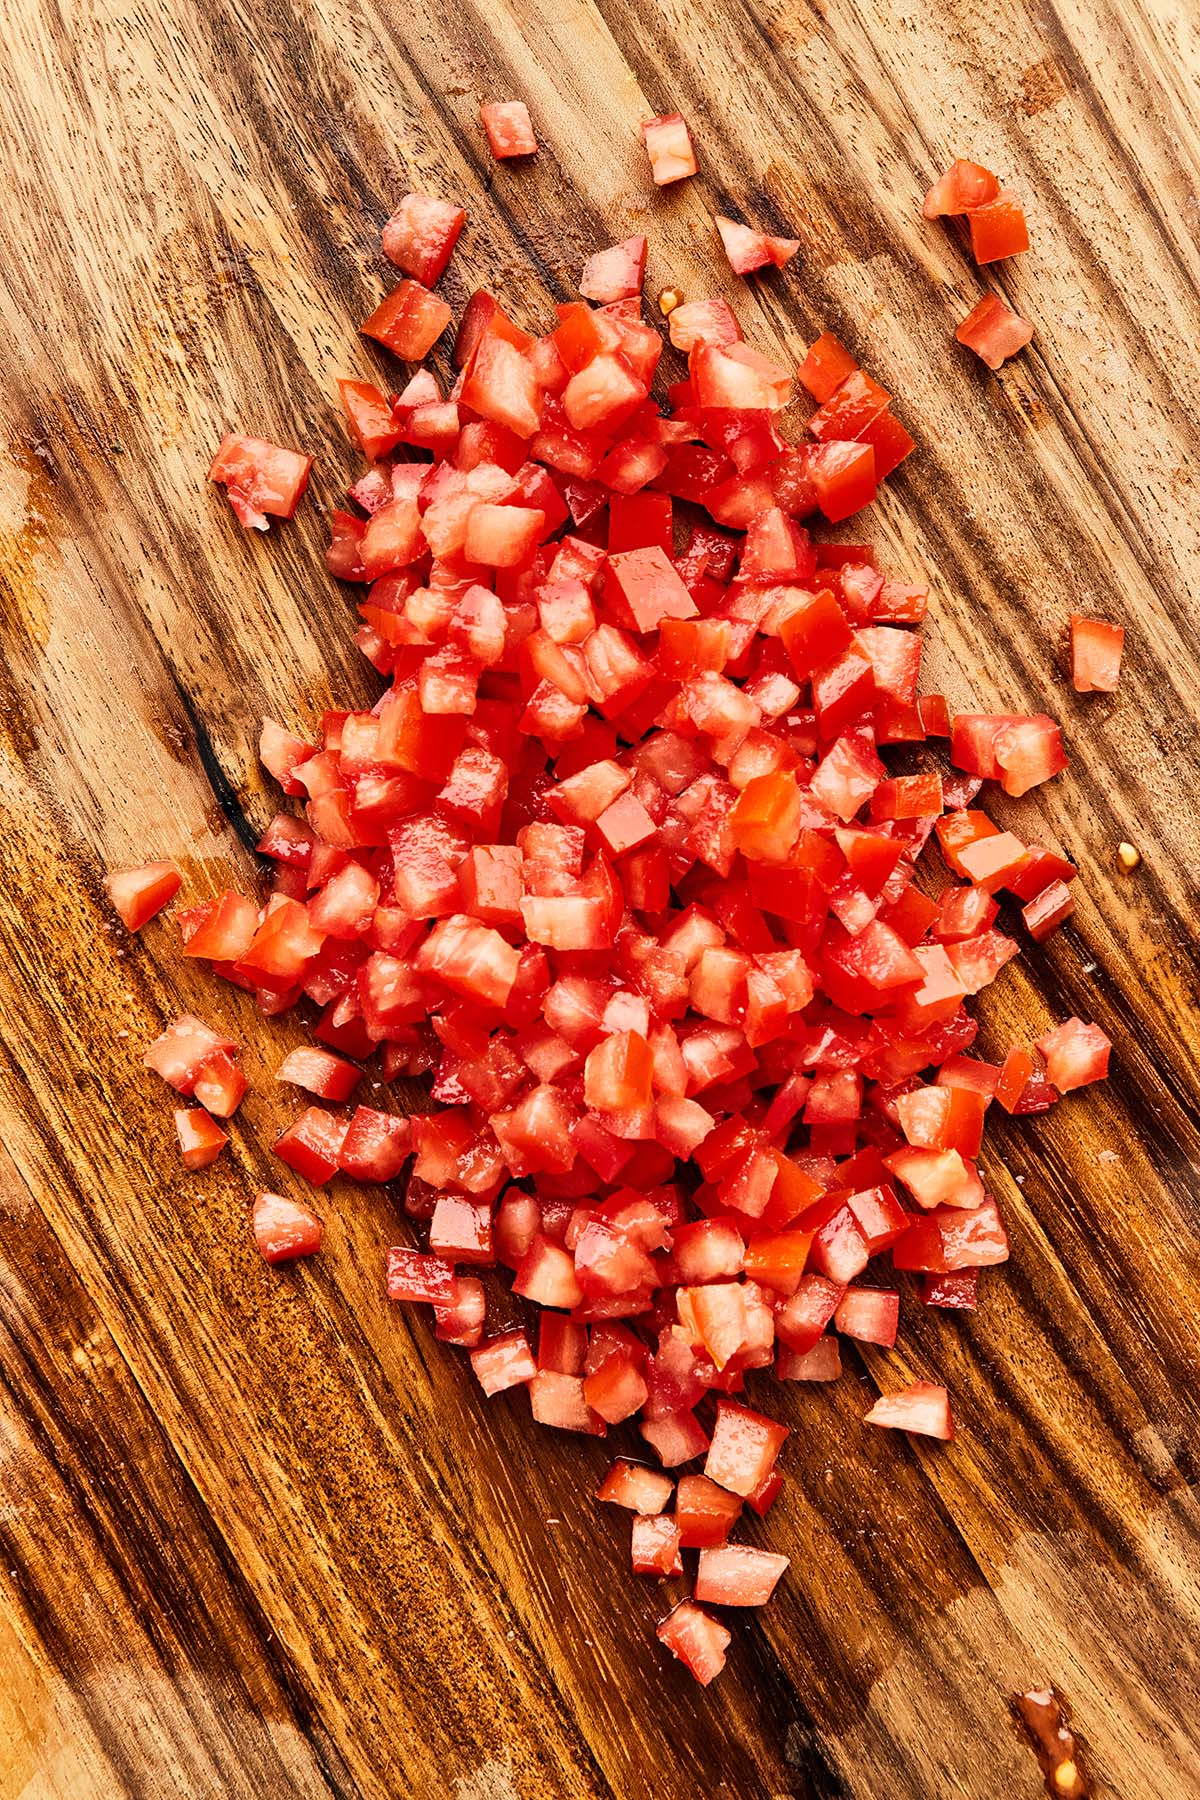 Finely diced tomatoes on a wooden cutting board.